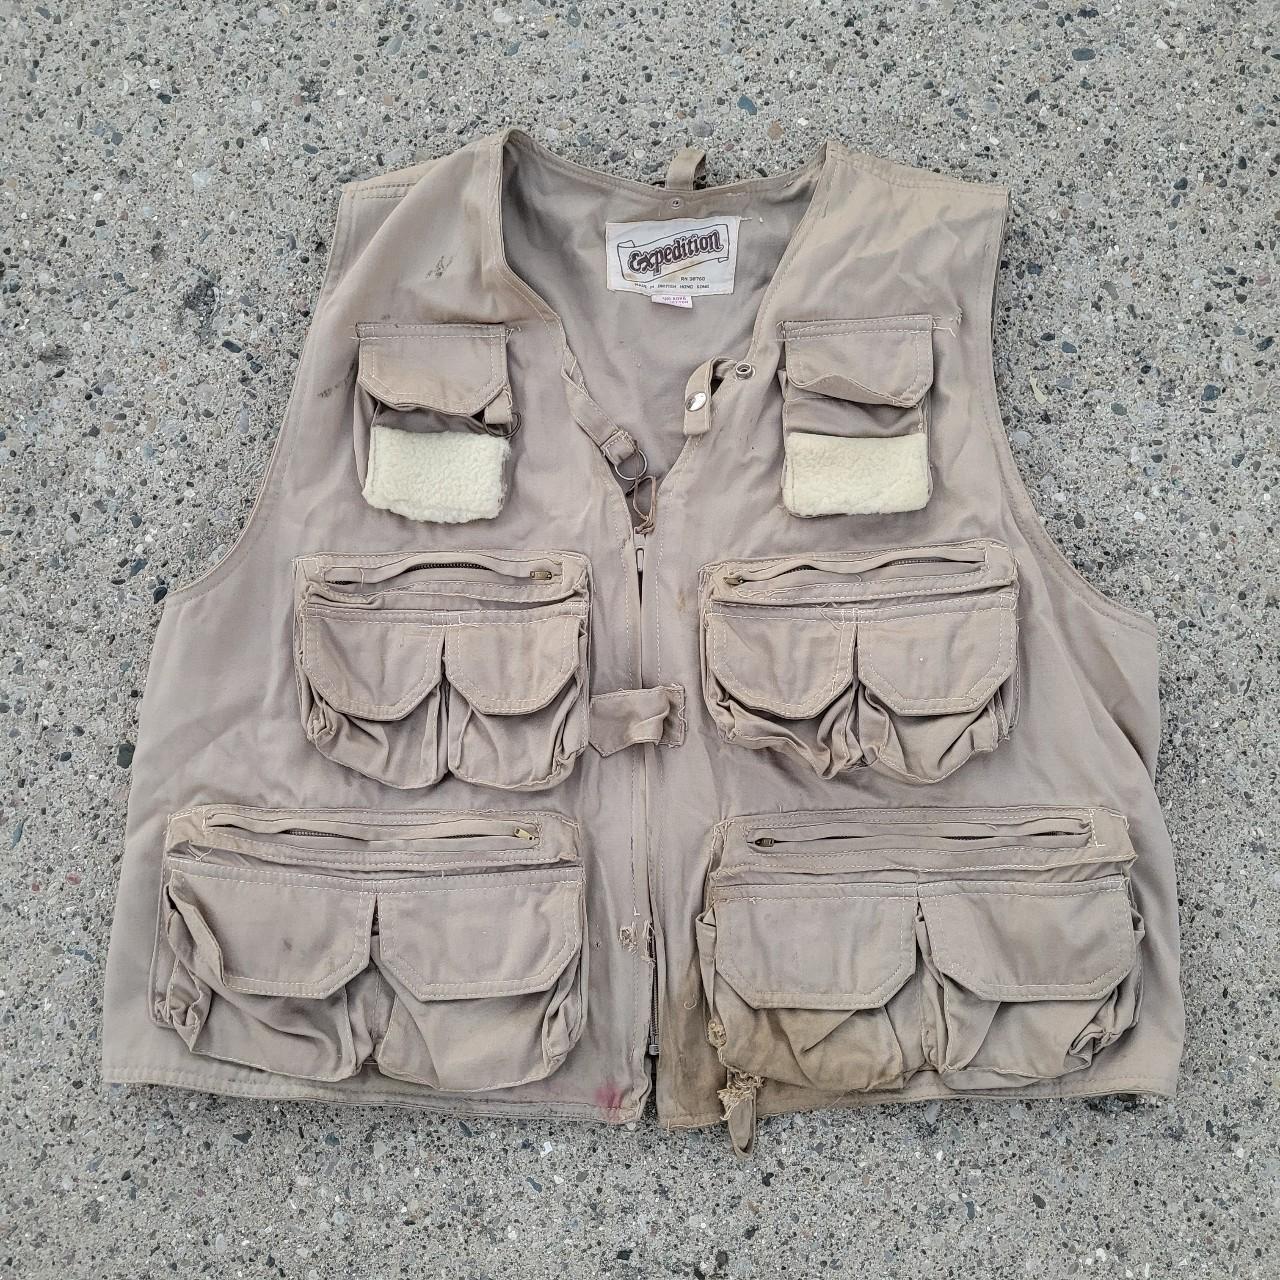 Vintage 80s Fly Fishing Utility Vest, Free shipping